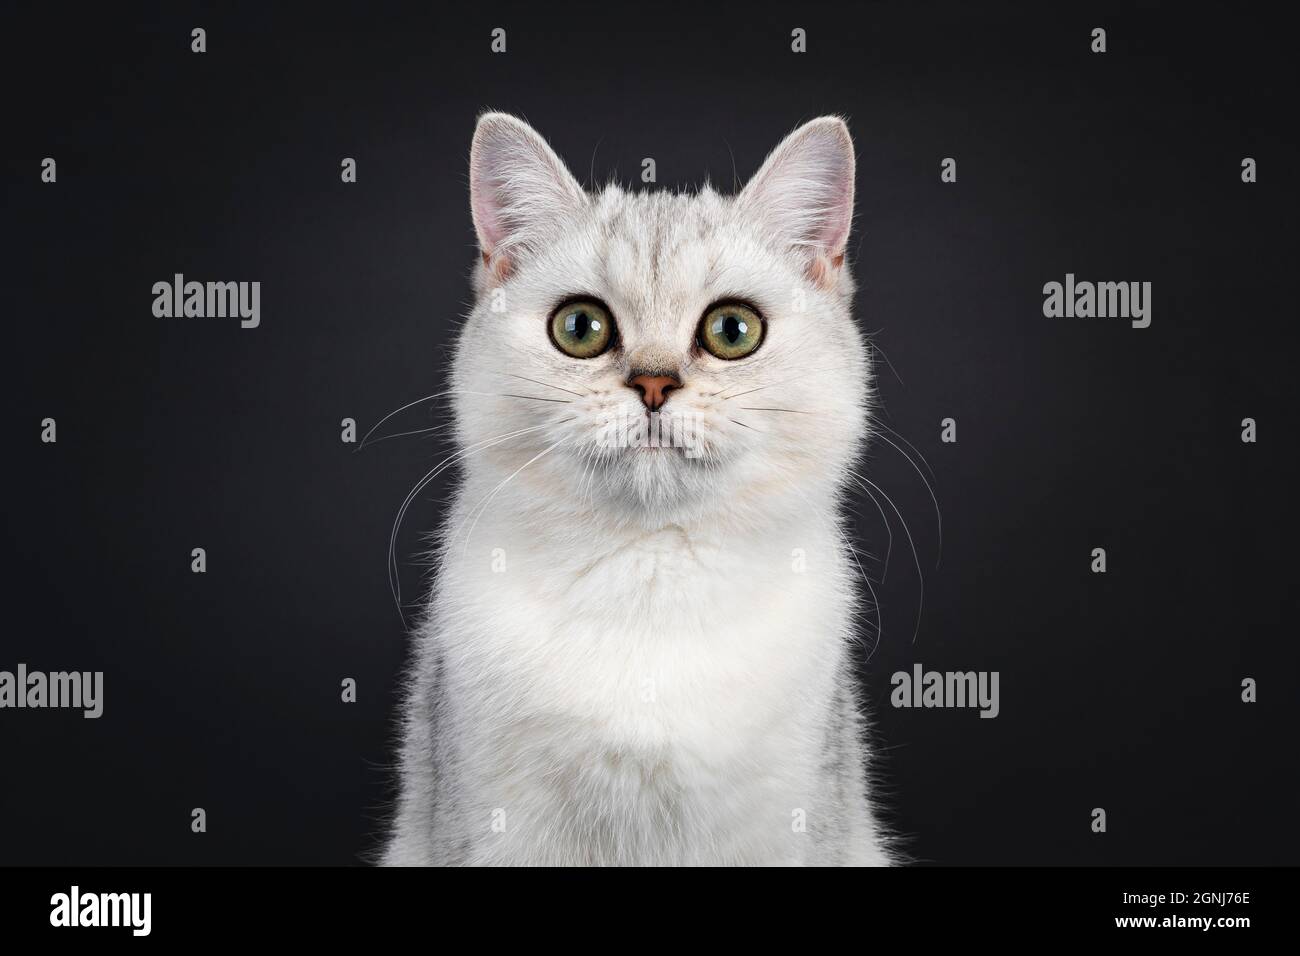 Head shot of cute silver shaded British Shorthair cat kitten, sitting facing front. Looking towards camera. Isolated on a black background. Stock Photo